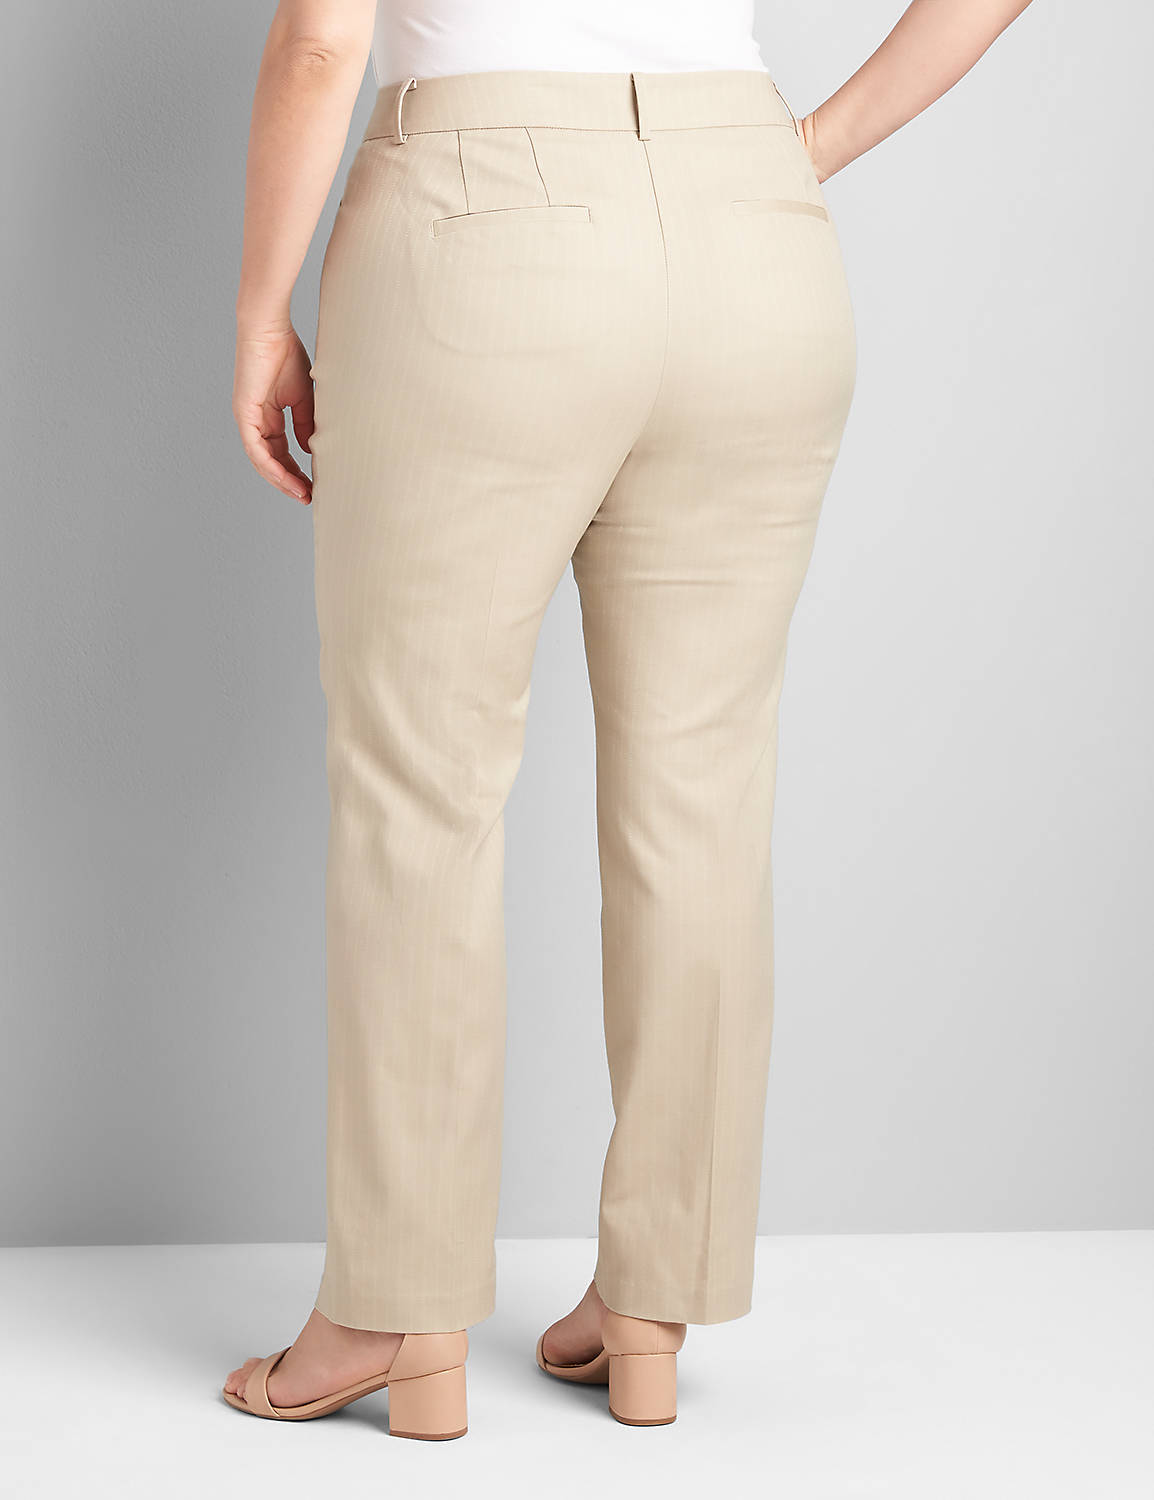 Signature Fit Straight Pant Product Image 2